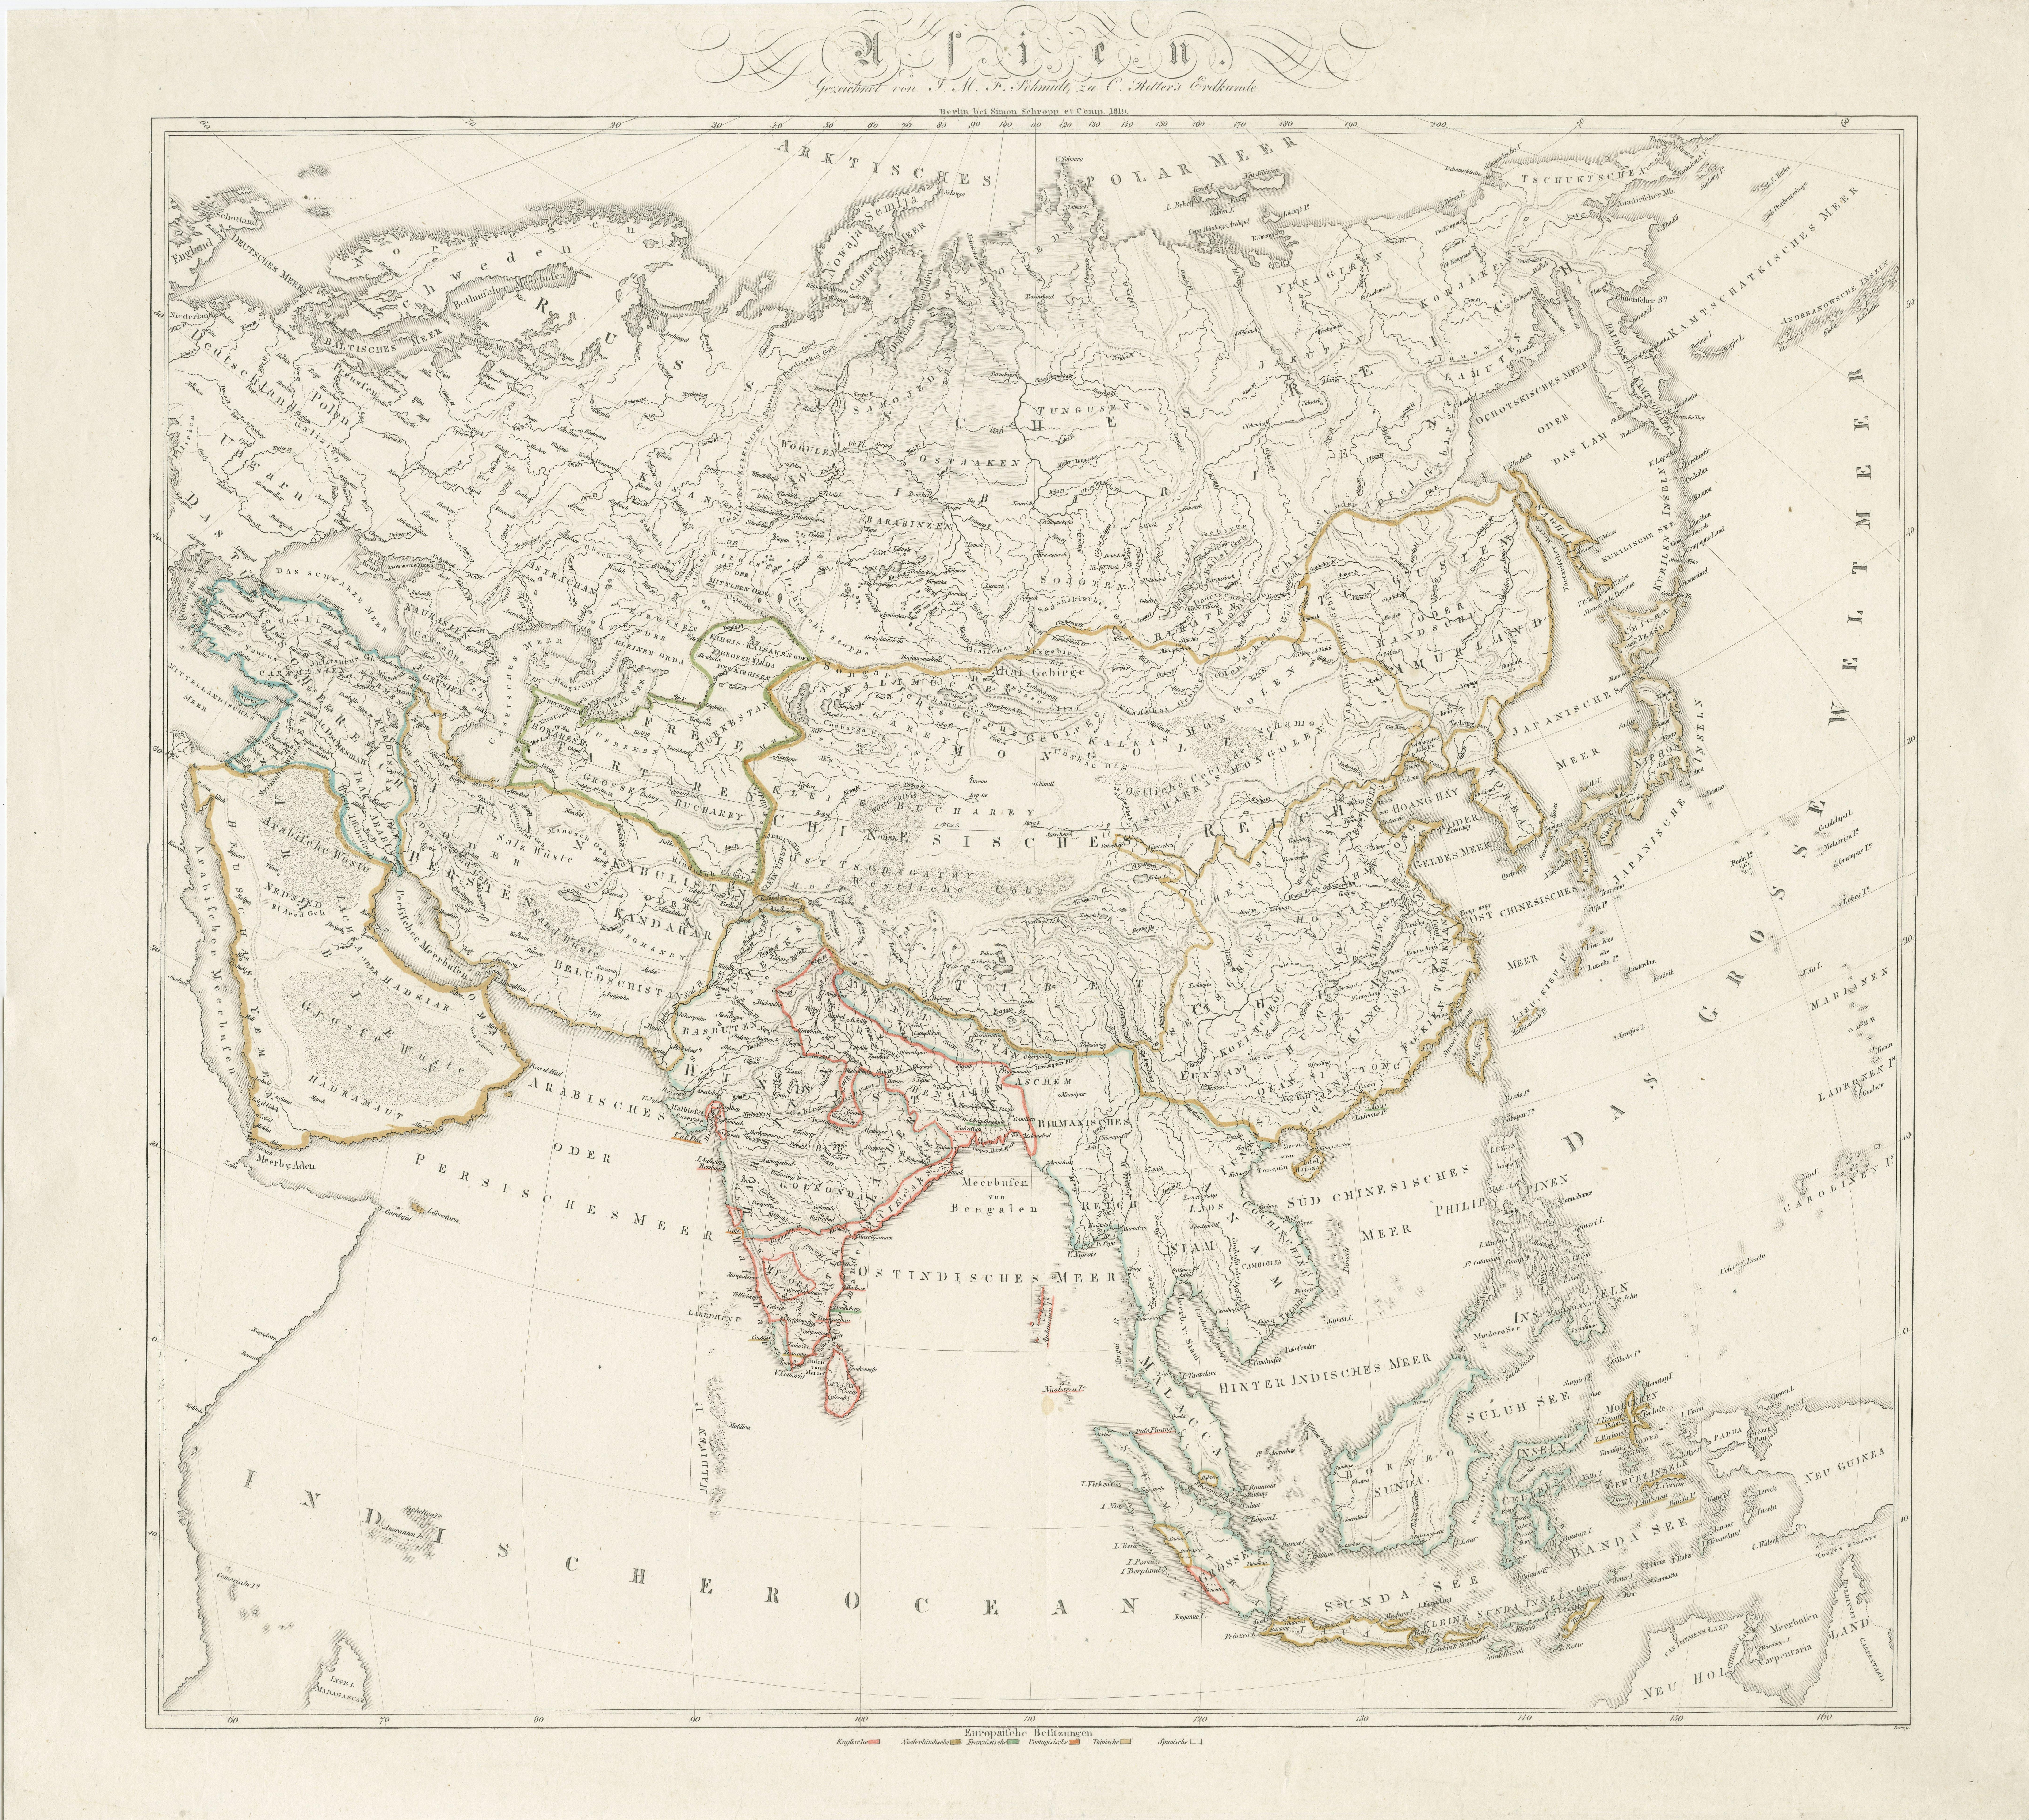 Antique map titled 'Asien'. Original old map of Asia. Published in Berlin by Simon Schropp et Comp, 1819.